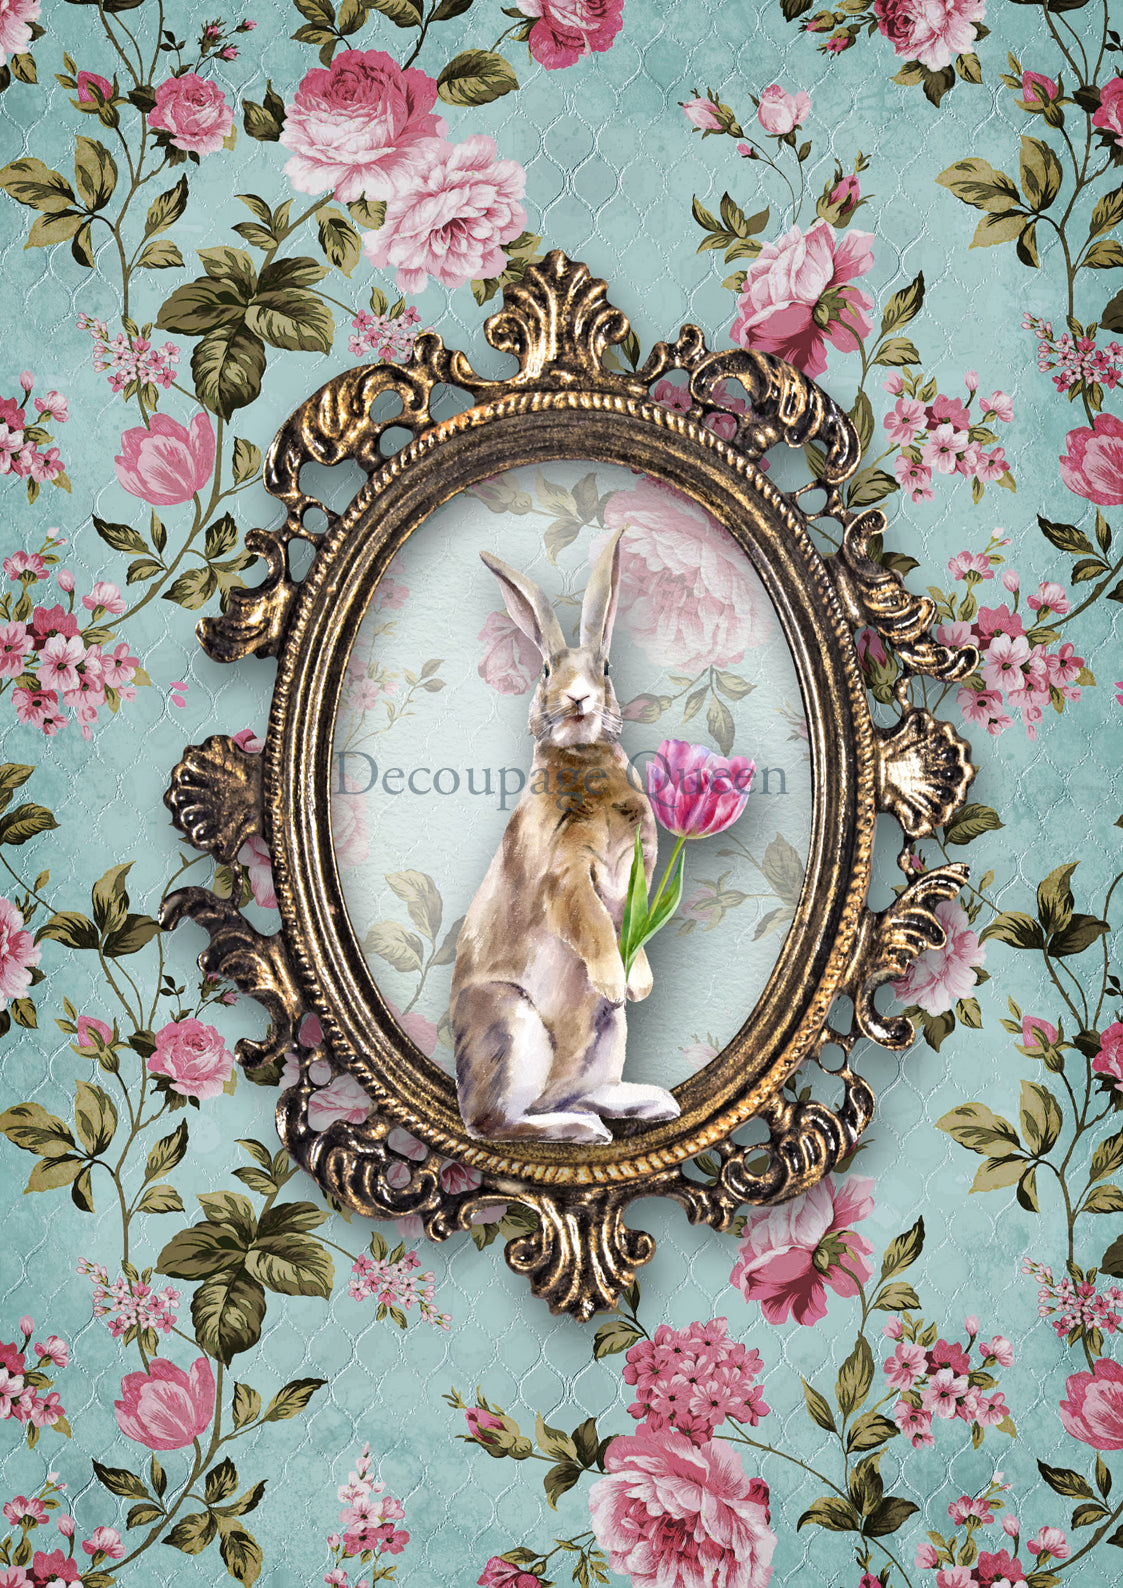 rose chintz and bunny decoupage paper